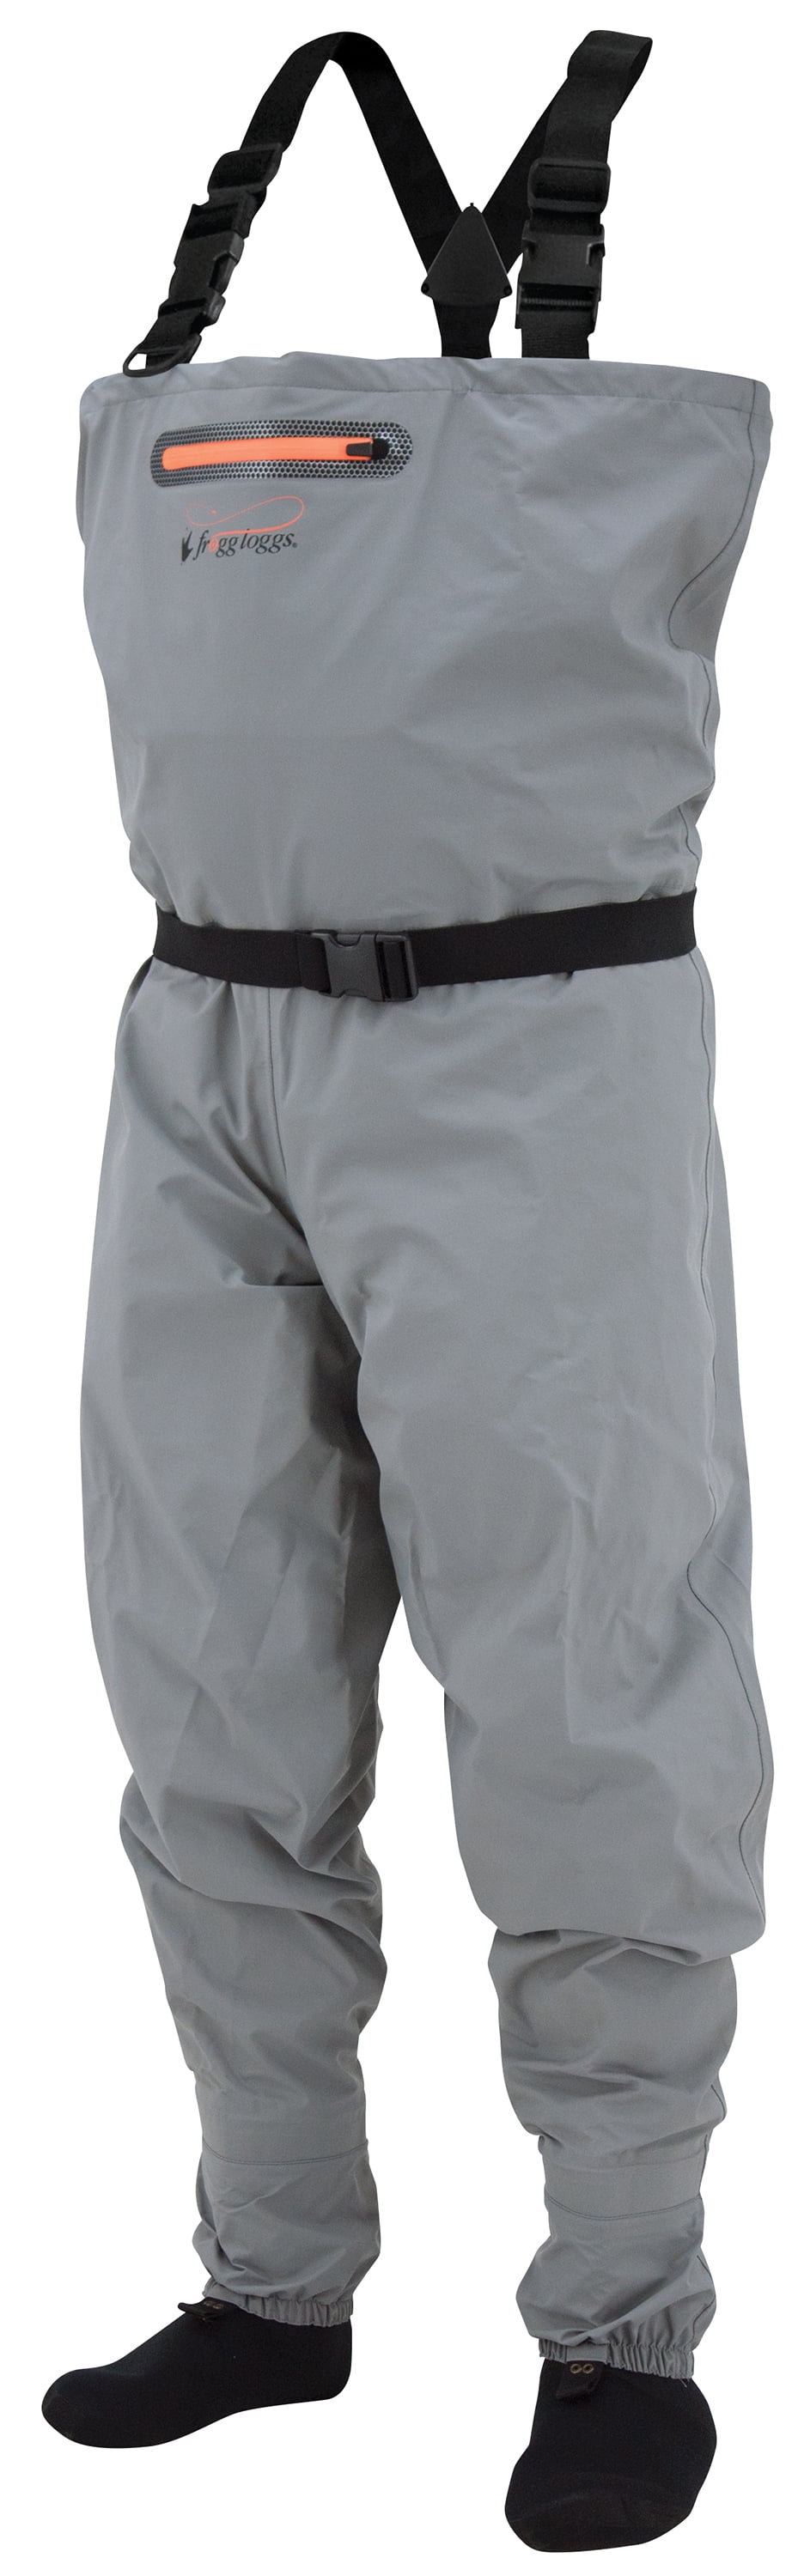 Details about   Frogg Toggs Sierran Breathable Stockingfoot Chest Wader 